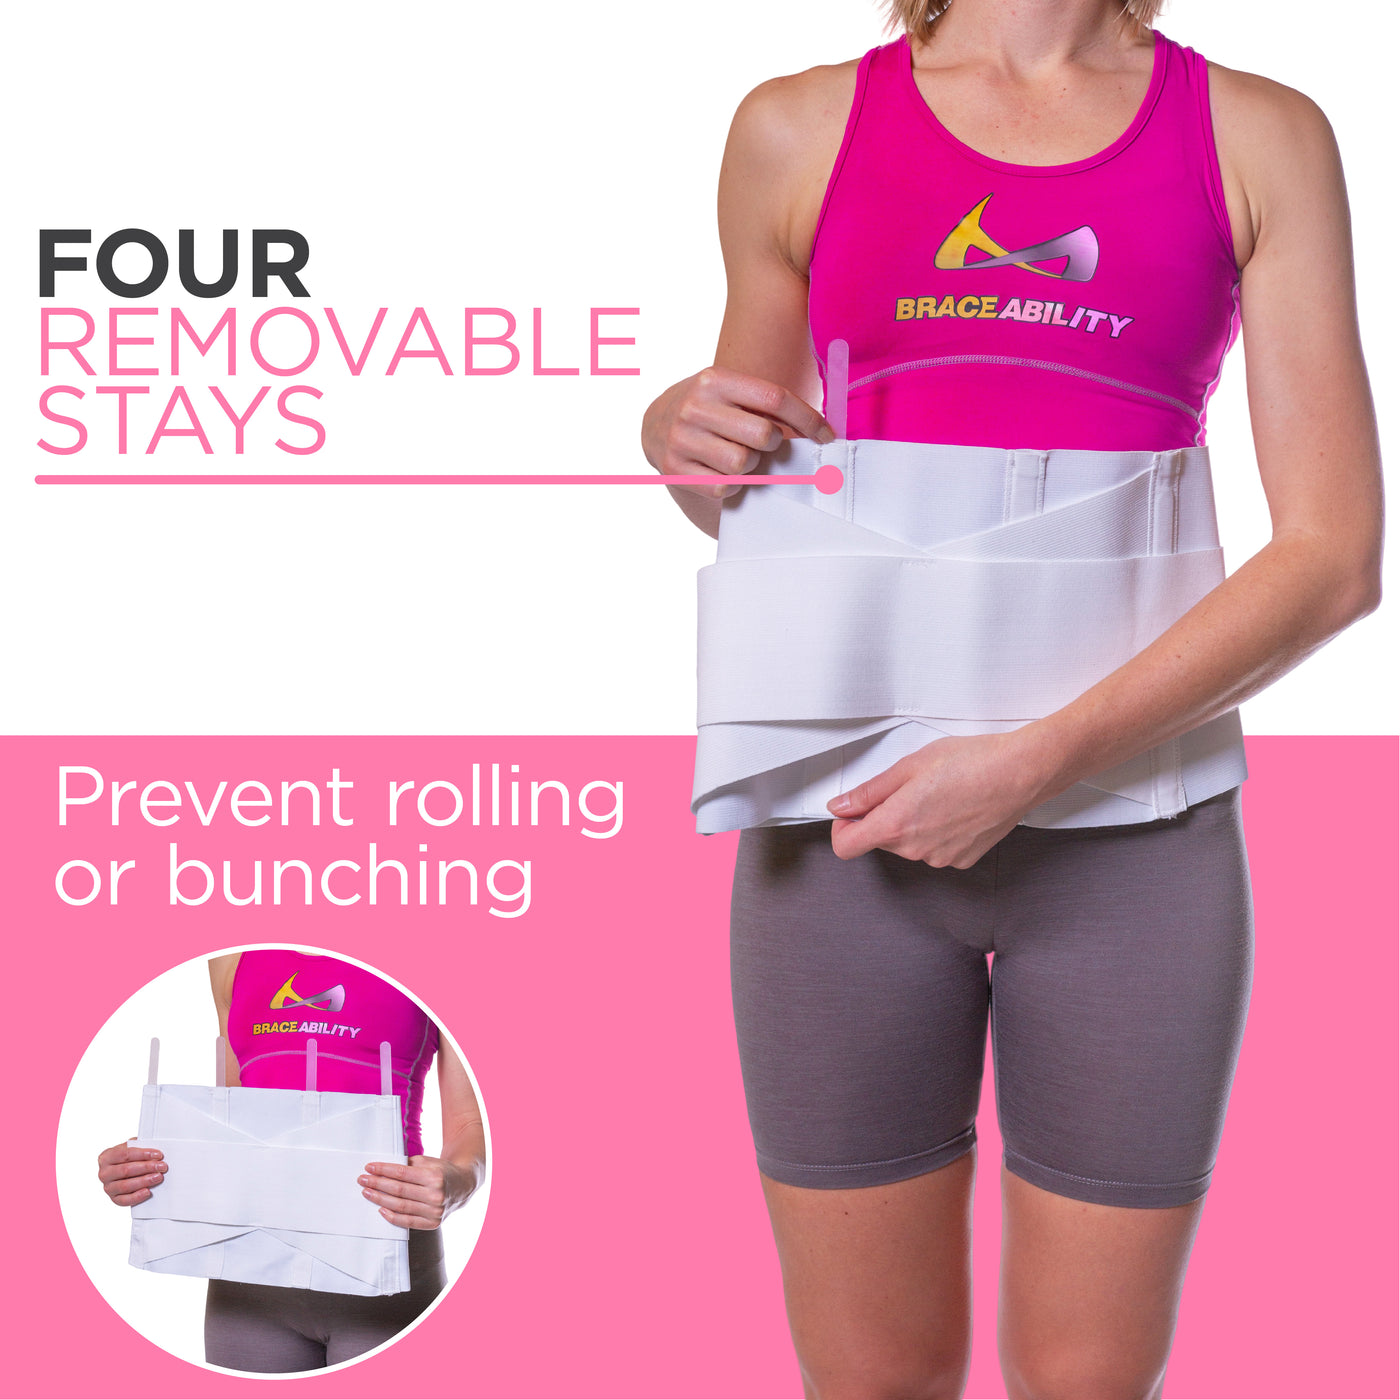 Removable stays on the womens back brace prevent the belt from rolling or bunching